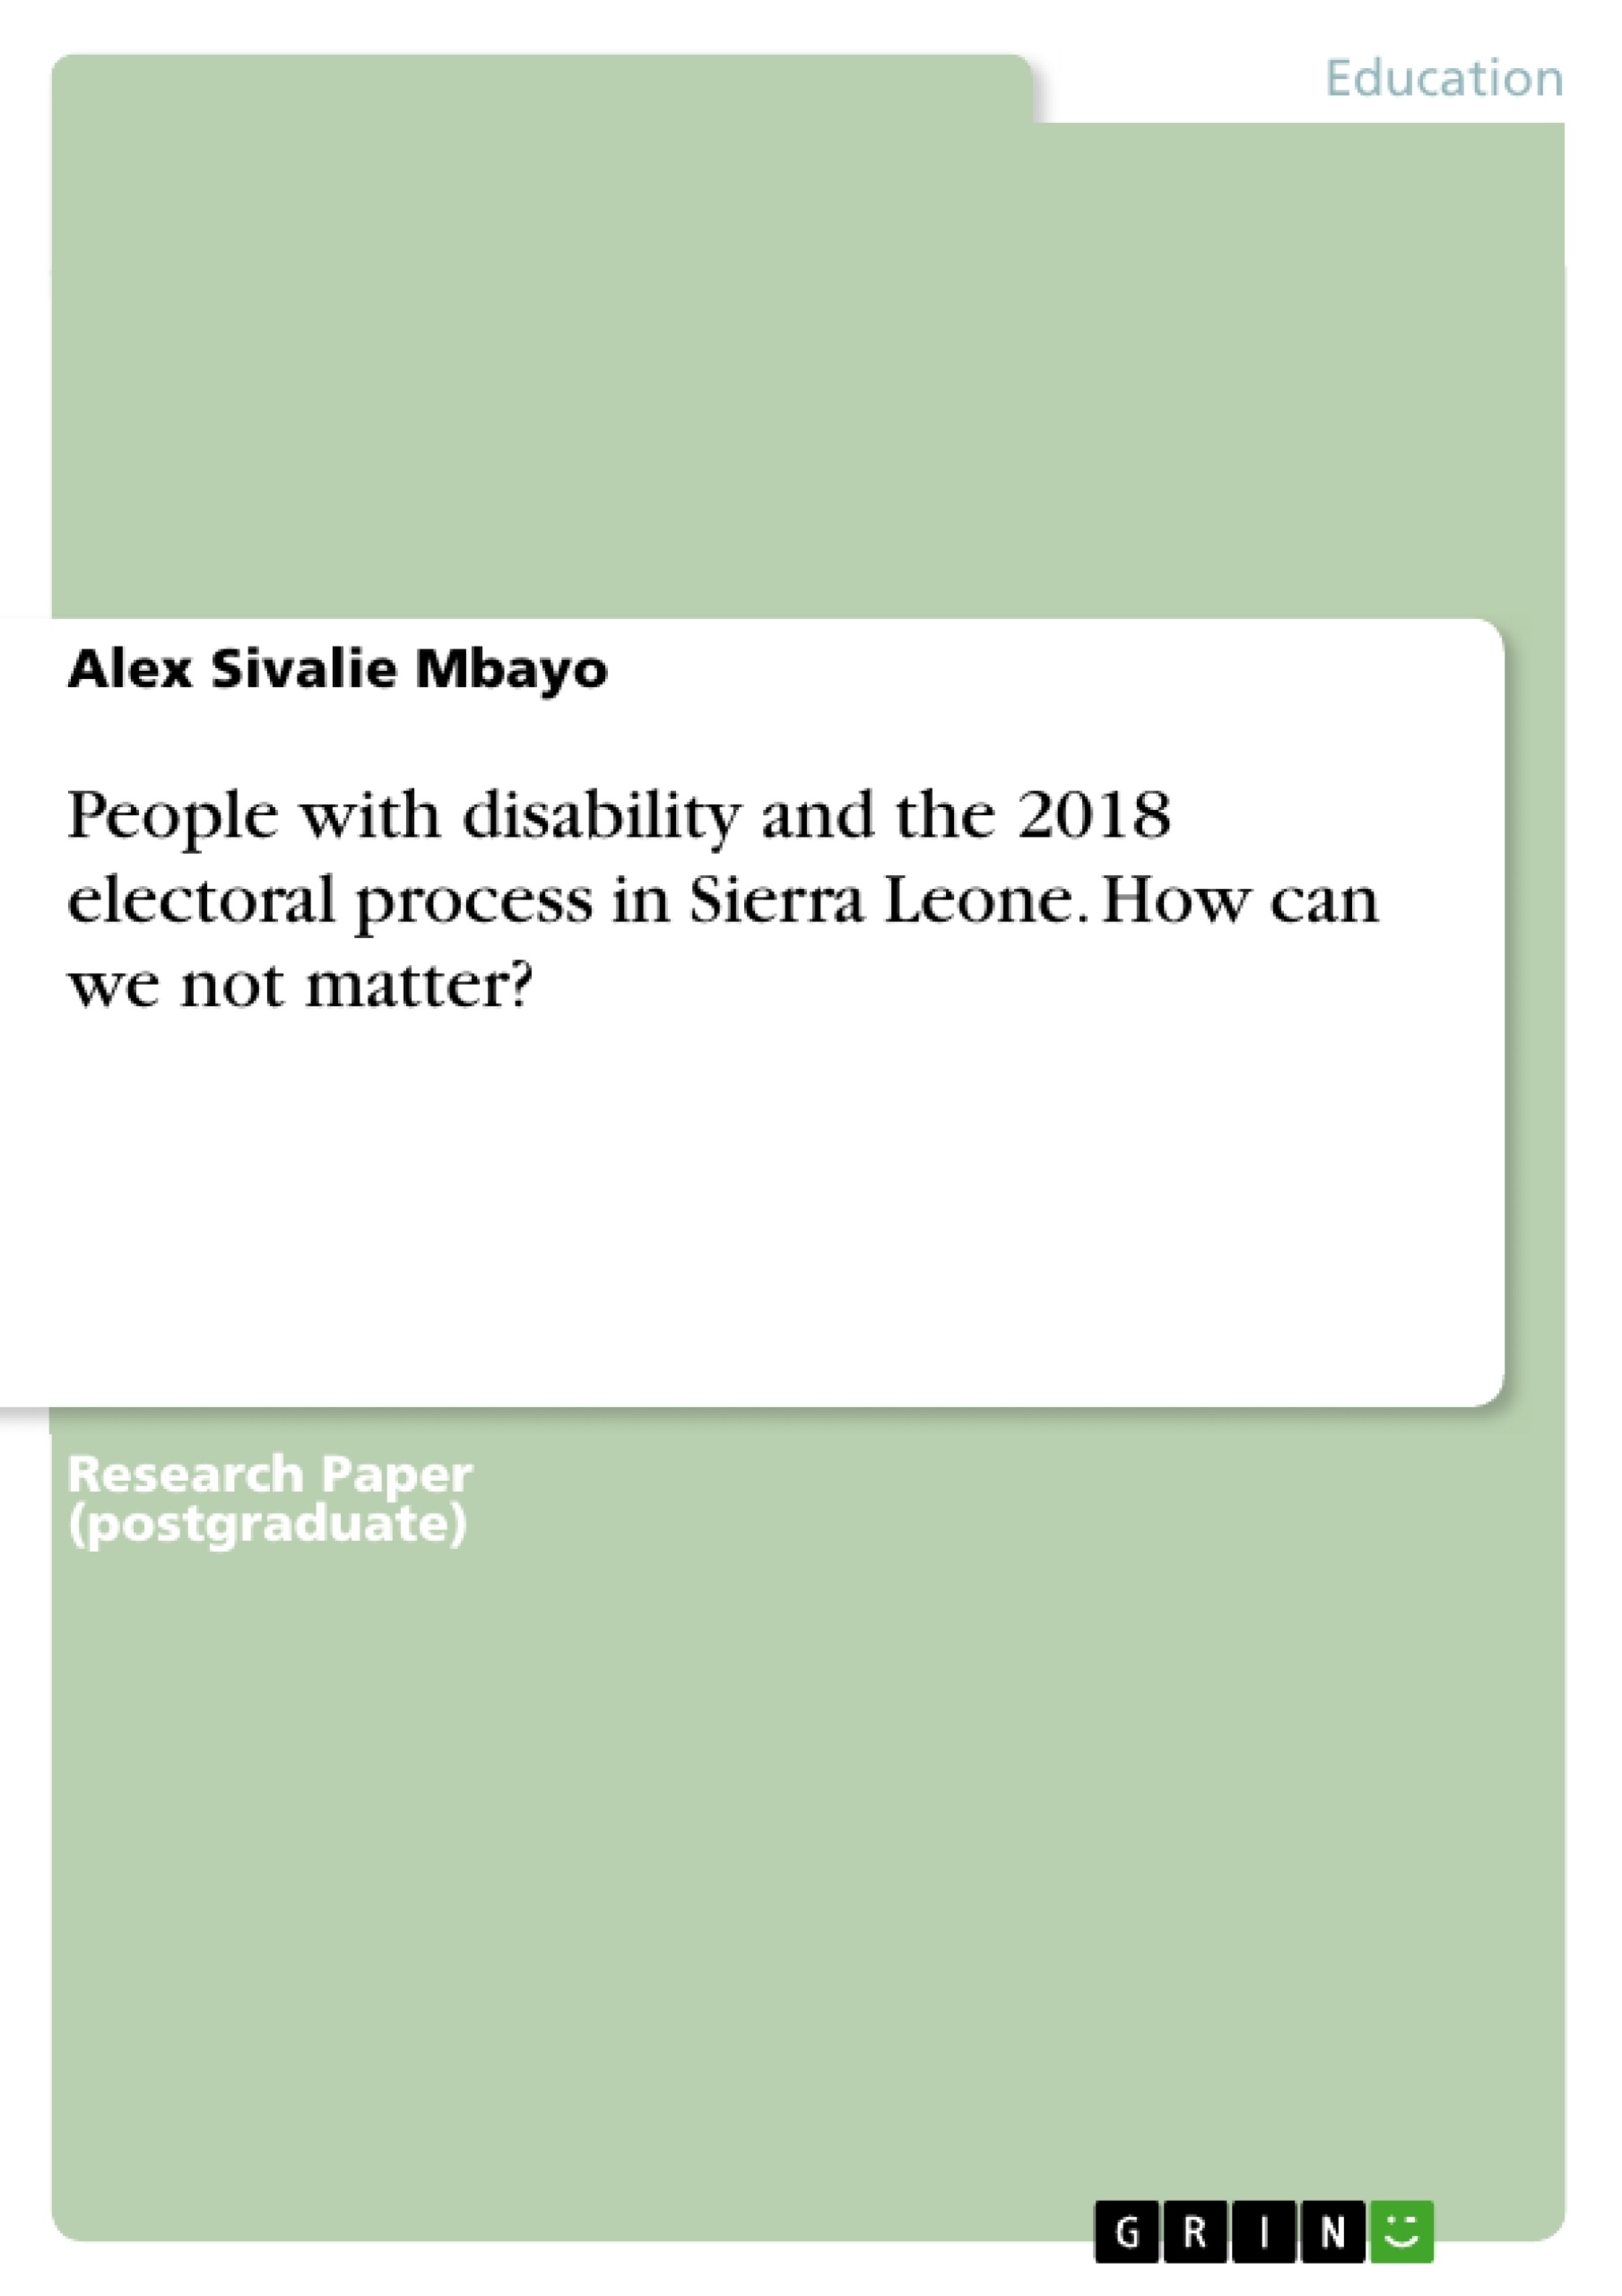 Titre: People with disability and the 2018 electoral process in Sierra Leone. How can we not matter?